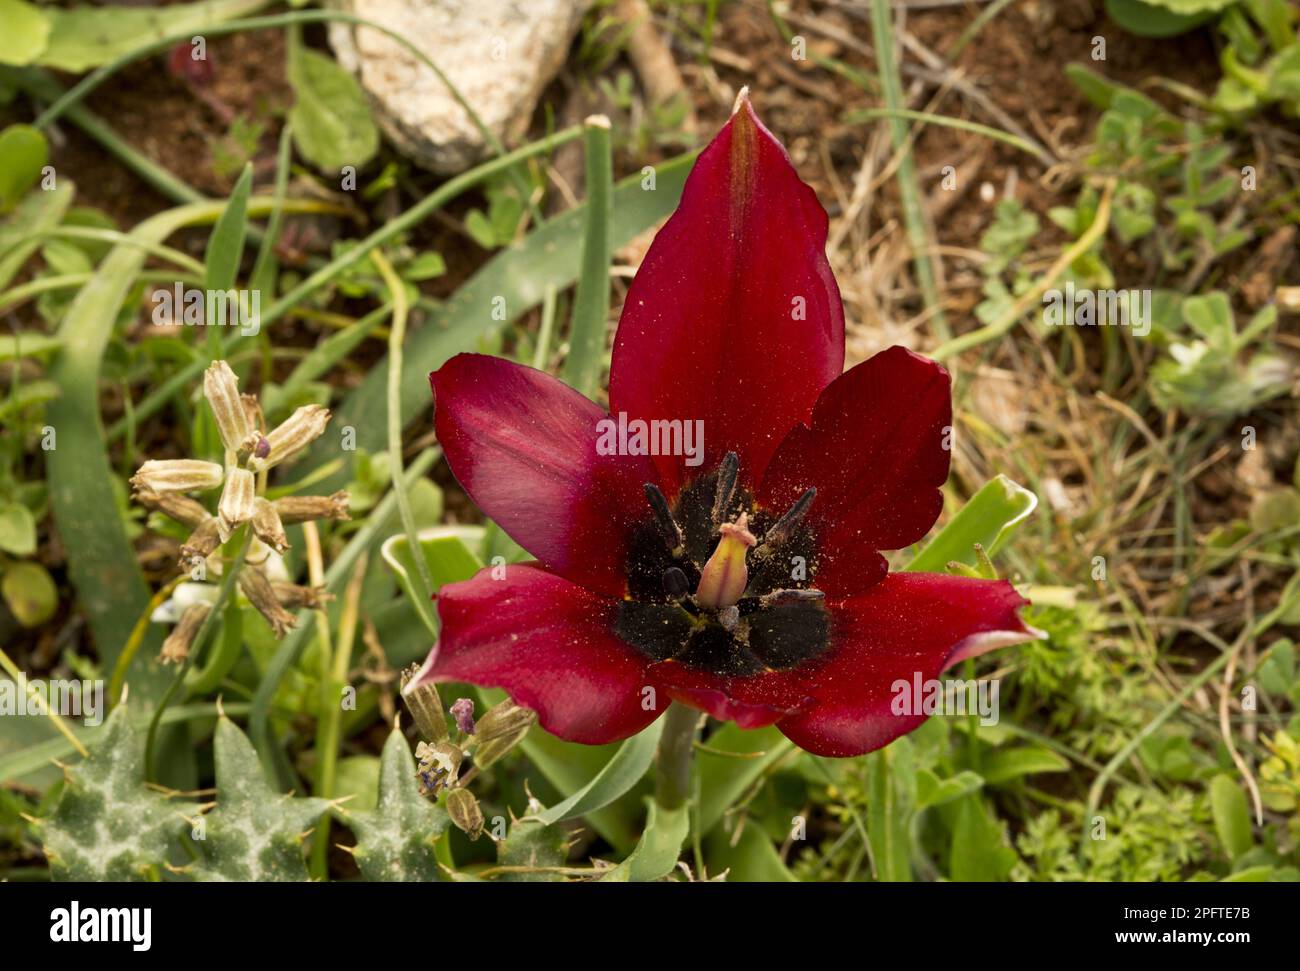 Cypriot tulip (Tulipa cypria) in flower, Cyprus Stock Photo